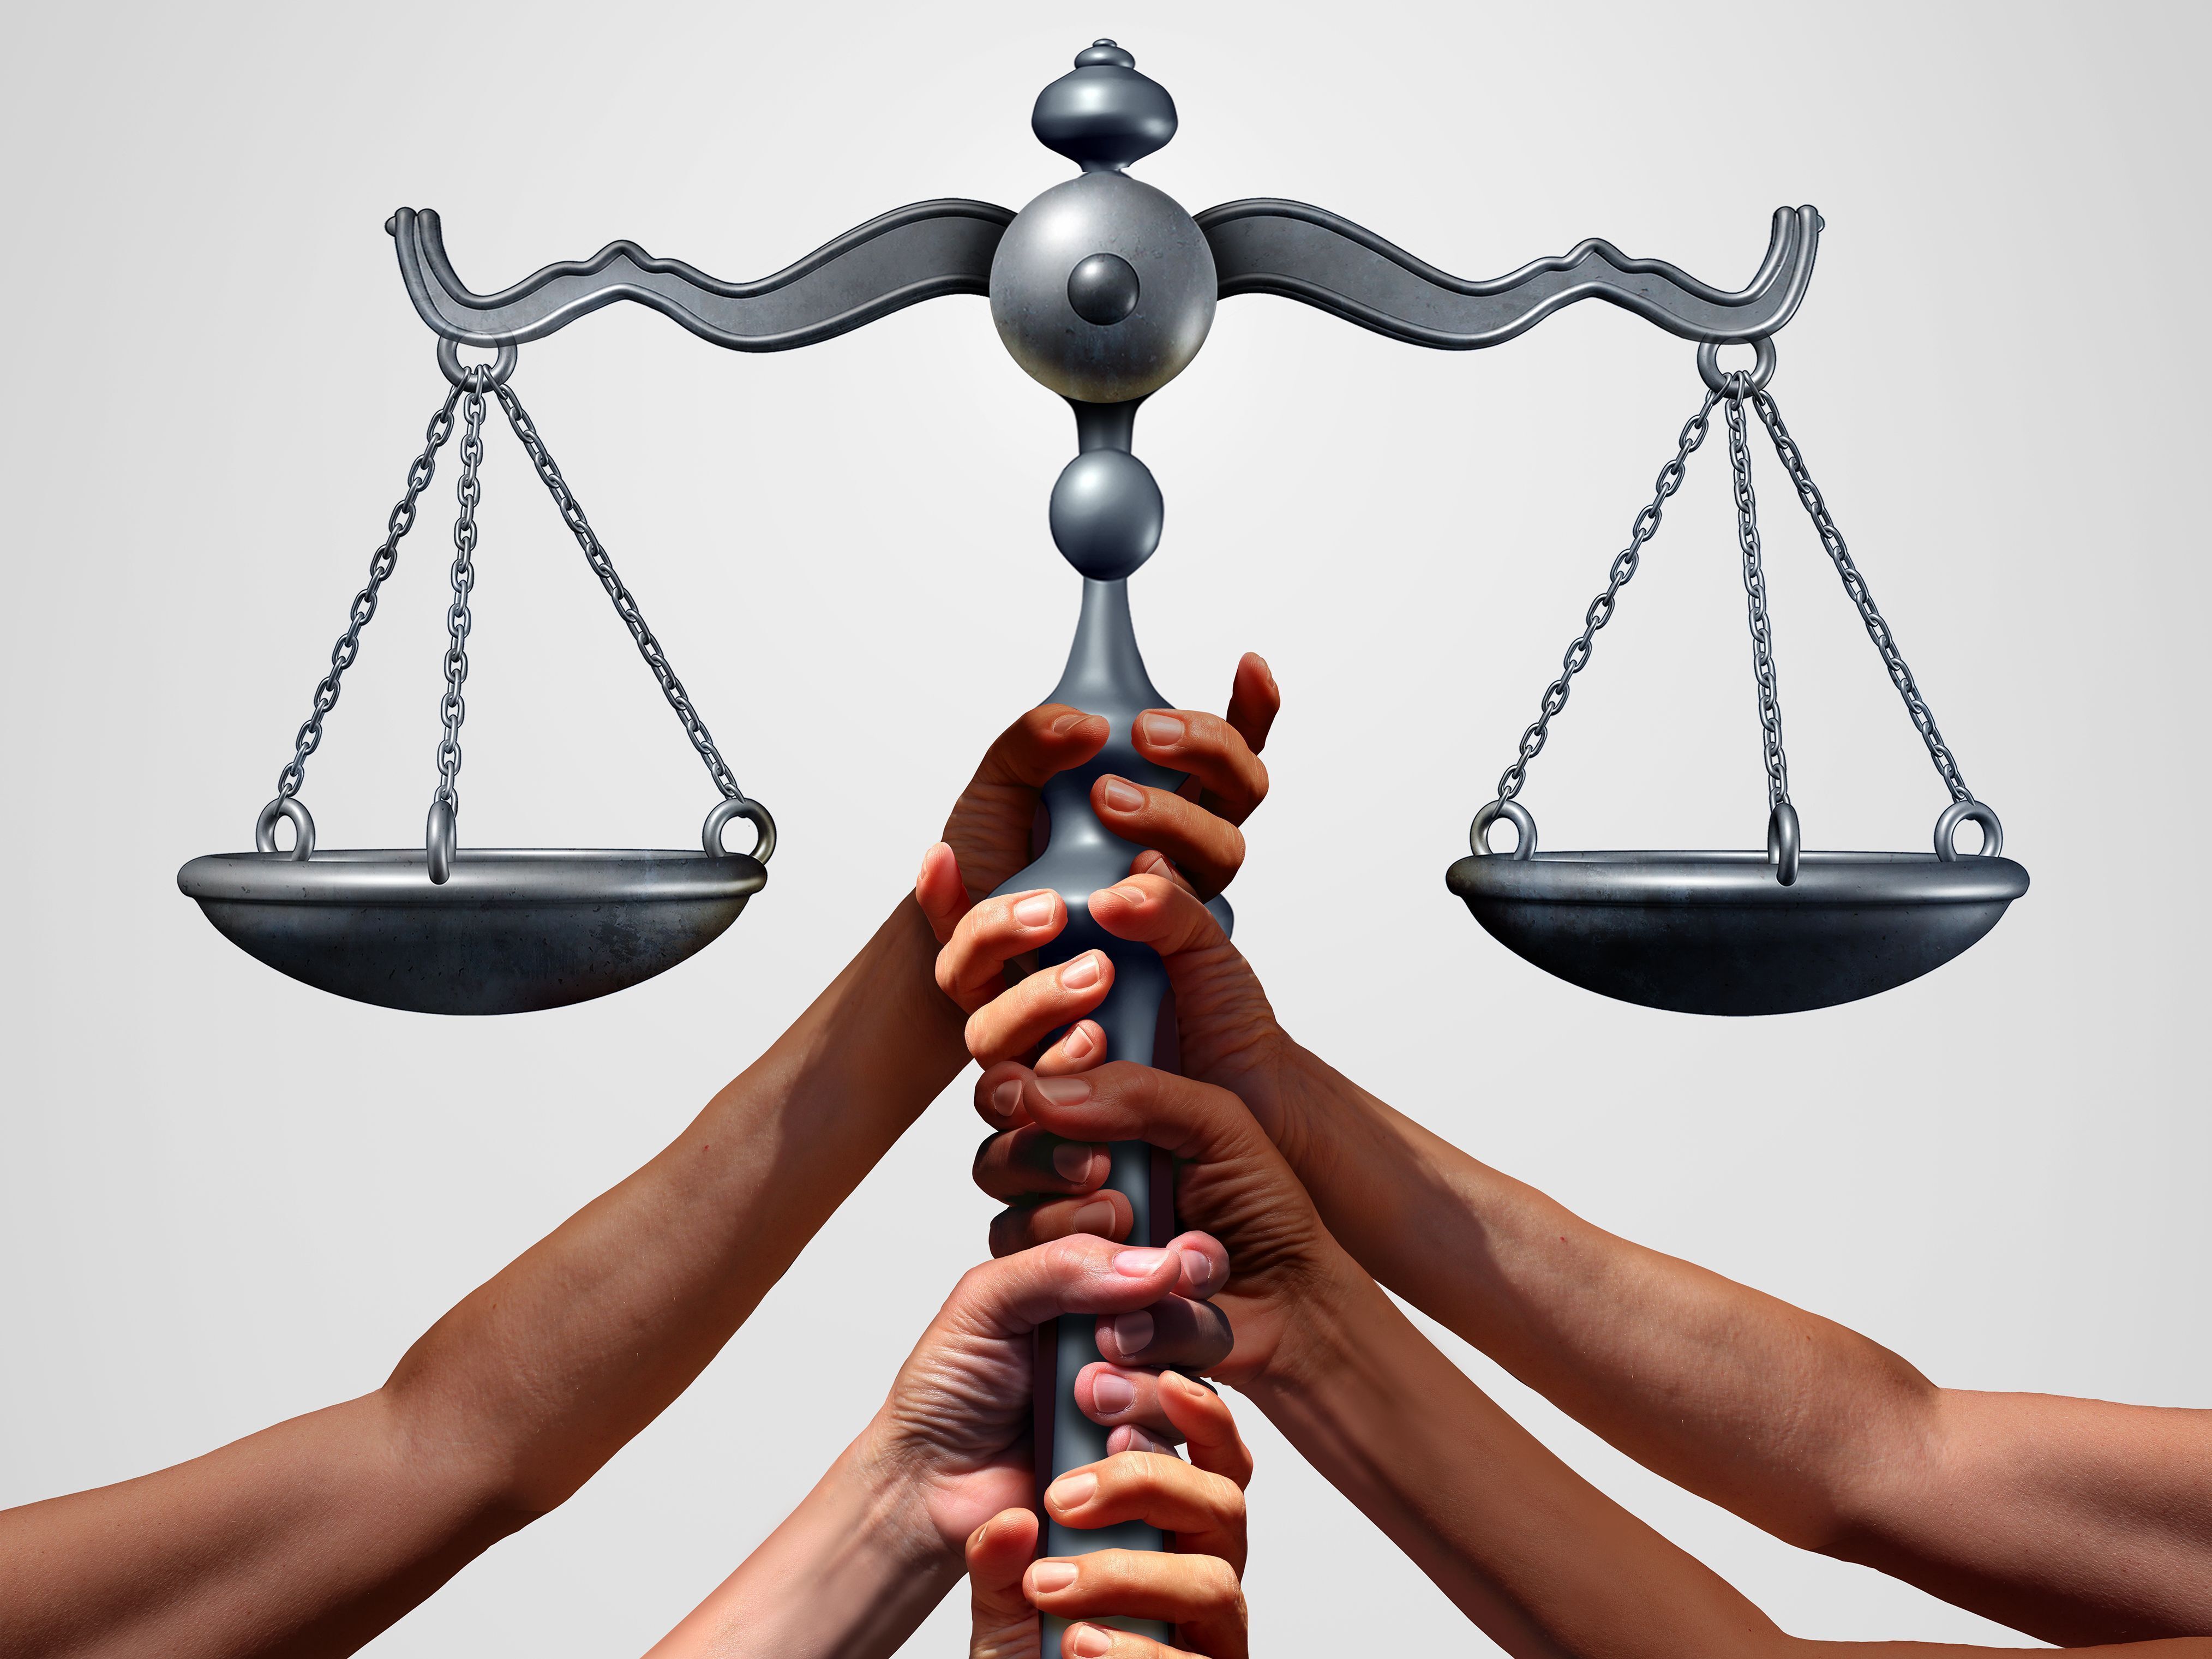 Diverse people extending their arms to hold up the scales of justice